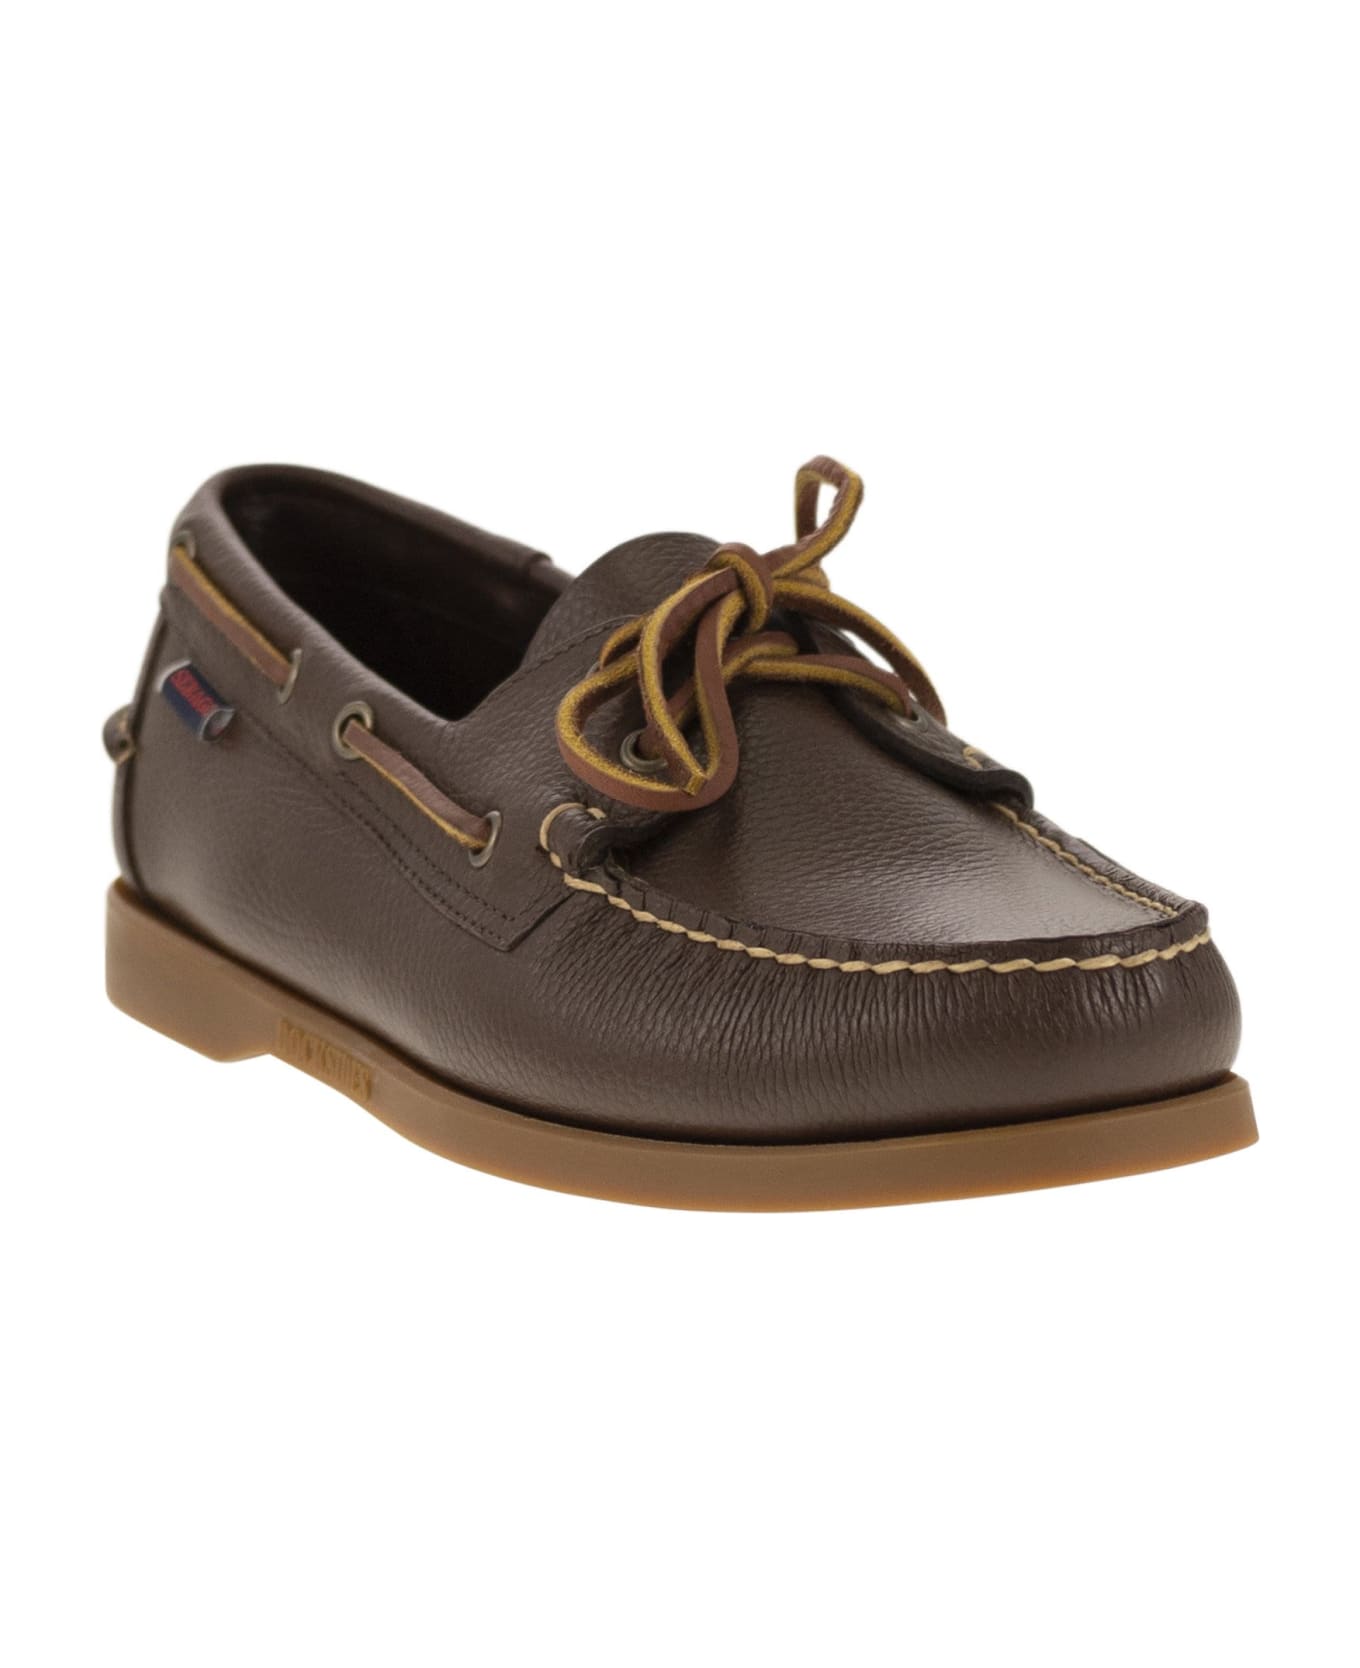 Sebago Portland - Moccasin With Grained Leather - Brown